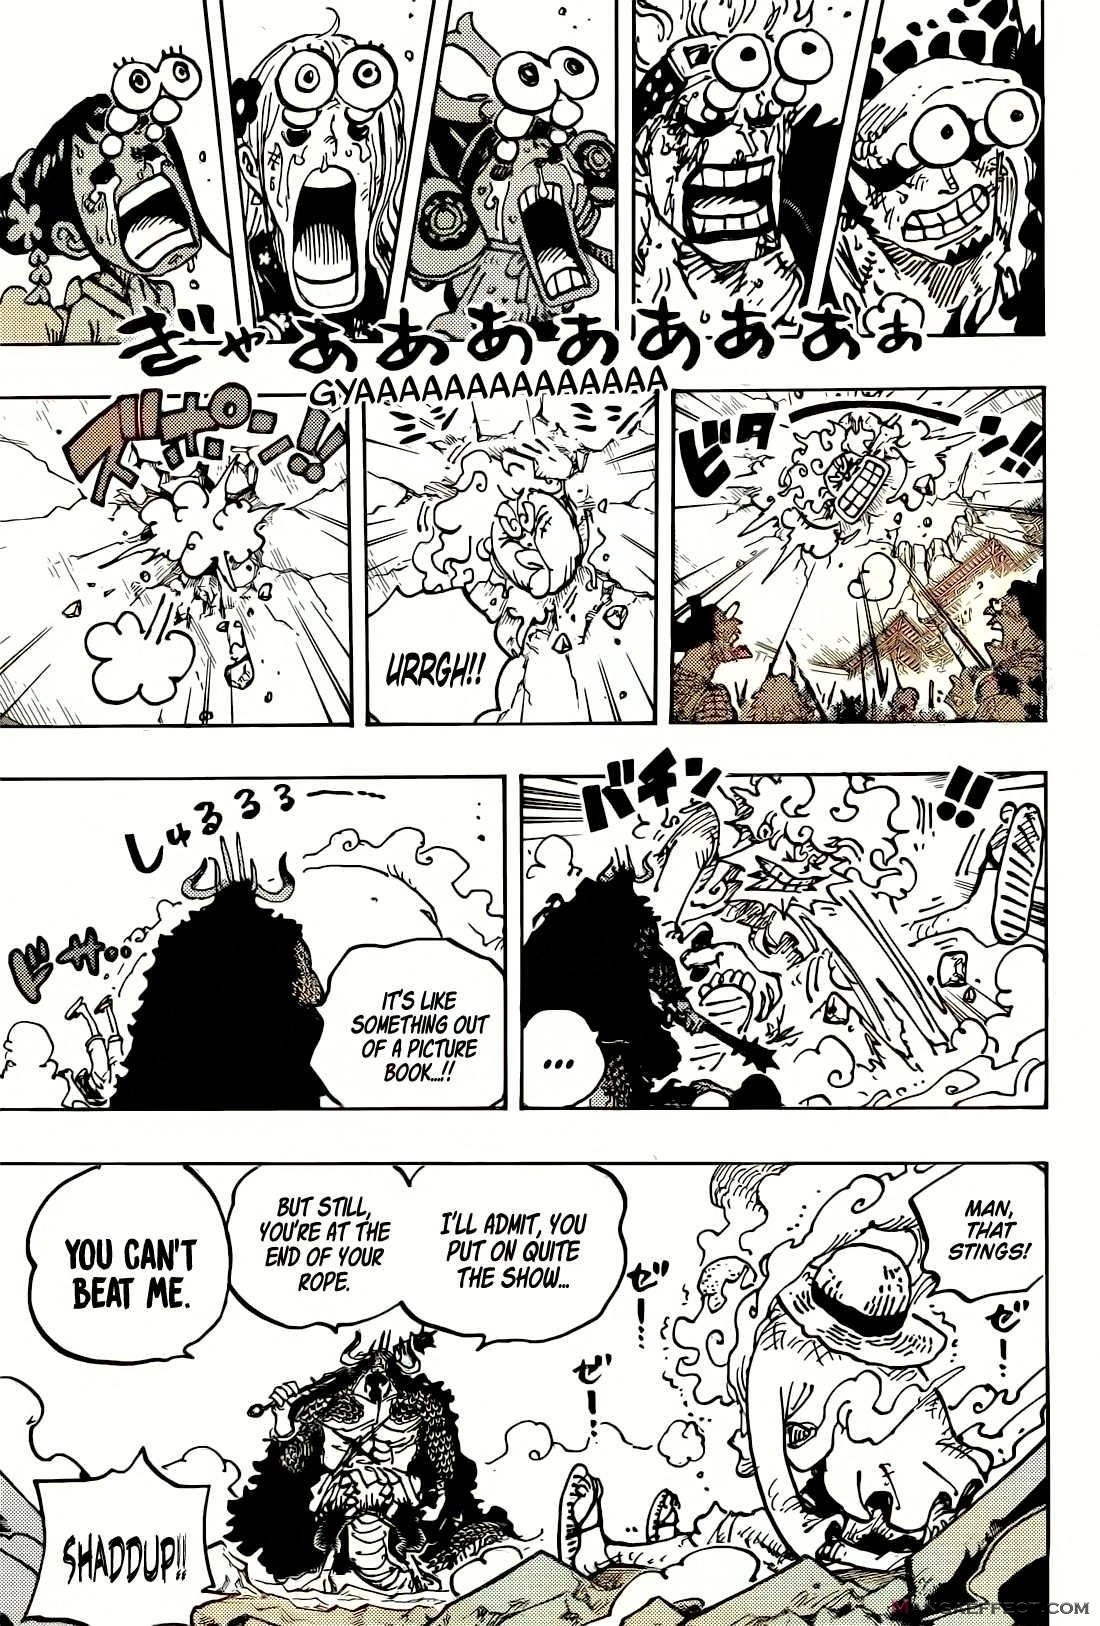 Read One Piece Chapter 1045 Colored In Mangaeffect Style By Ai